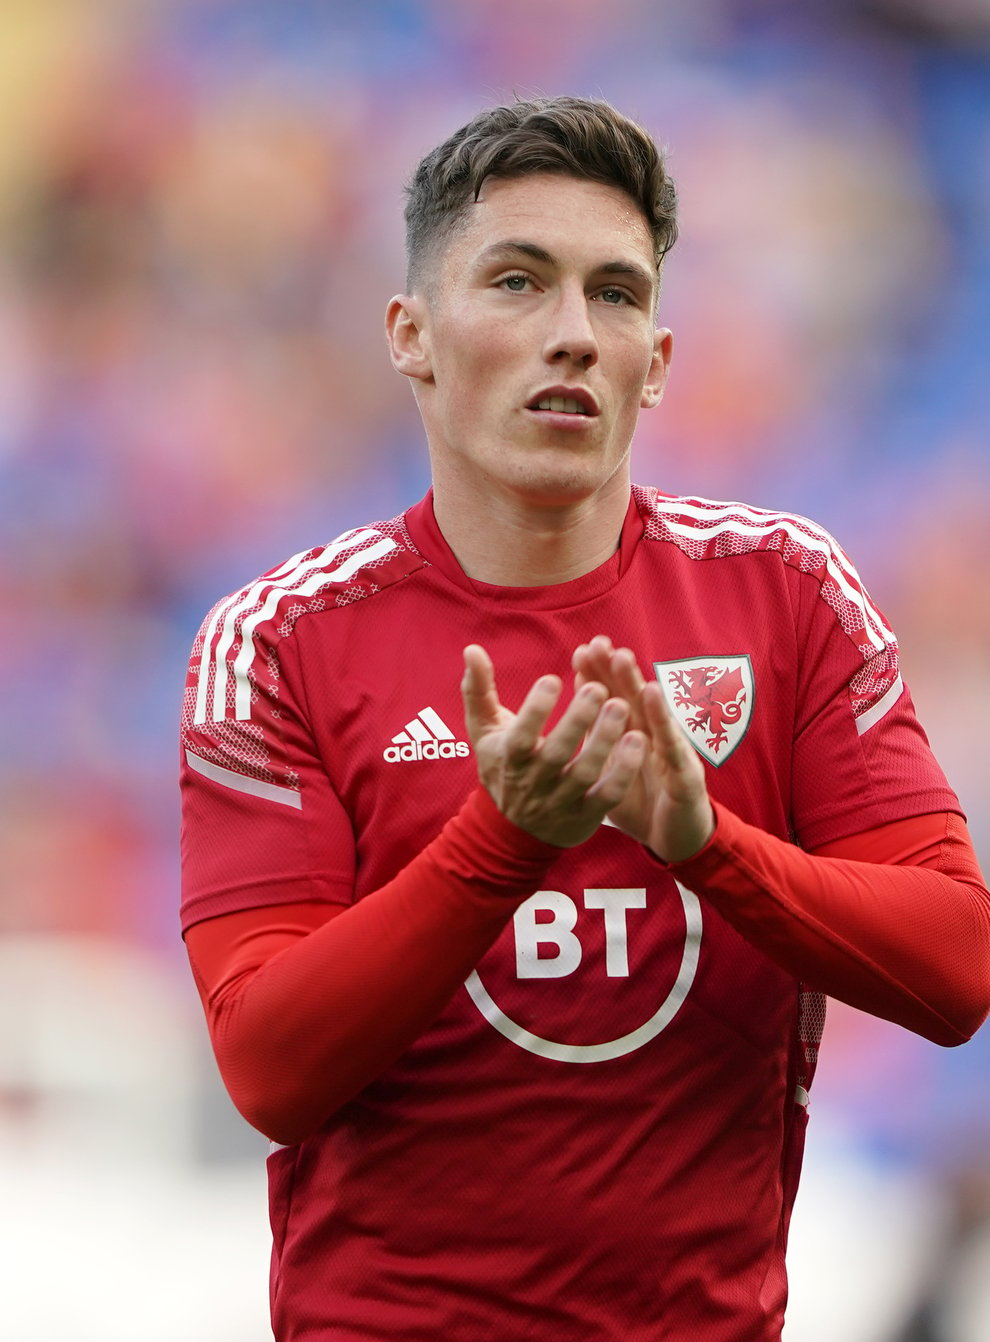 Marco Silva believes Harry Wilson, pictured, will recover from his injury in time to play for Wales at the World Cup (Zac Goodwin/PA)